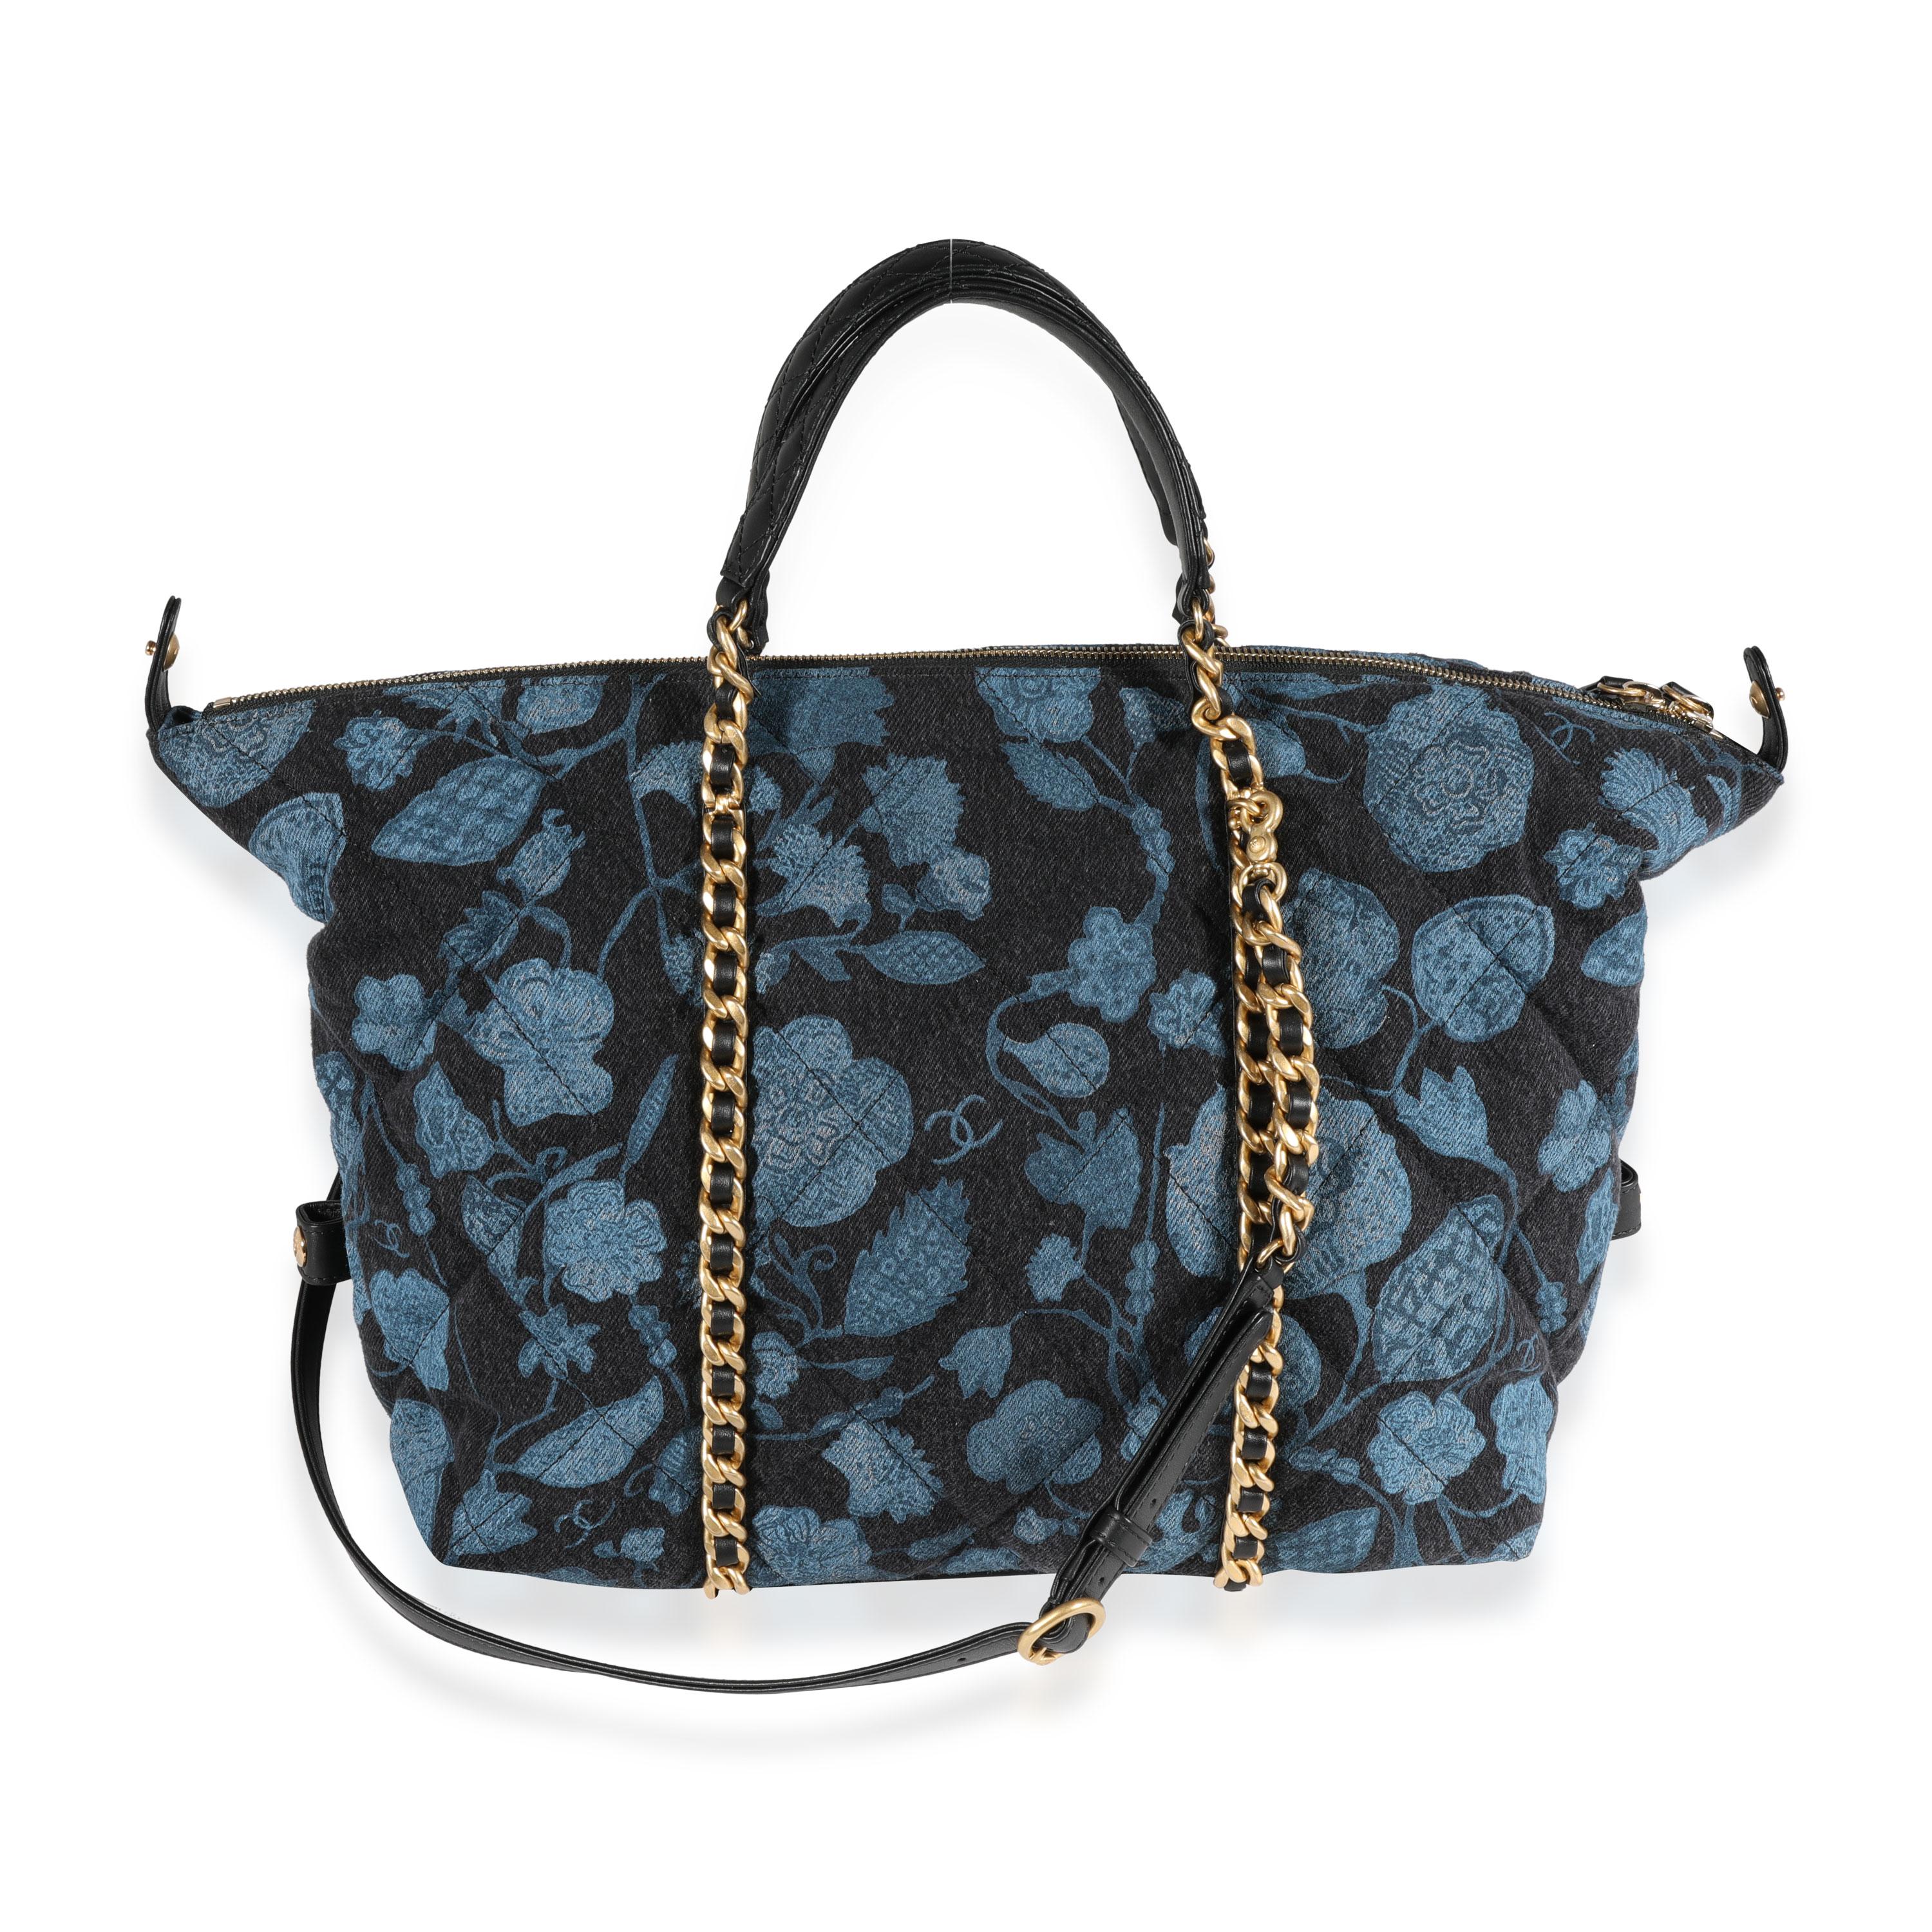 Listing Title: Chanel Blue Floral Quilted Denim Bowling Bag
SKU: 121833
MSRP: 4800.00
Condition: Pre-owned 
Handbag Condition: Excellent
Condition Comments: Excellent Condition. Some plastic at hardware. Minor scratching at hardware. No other